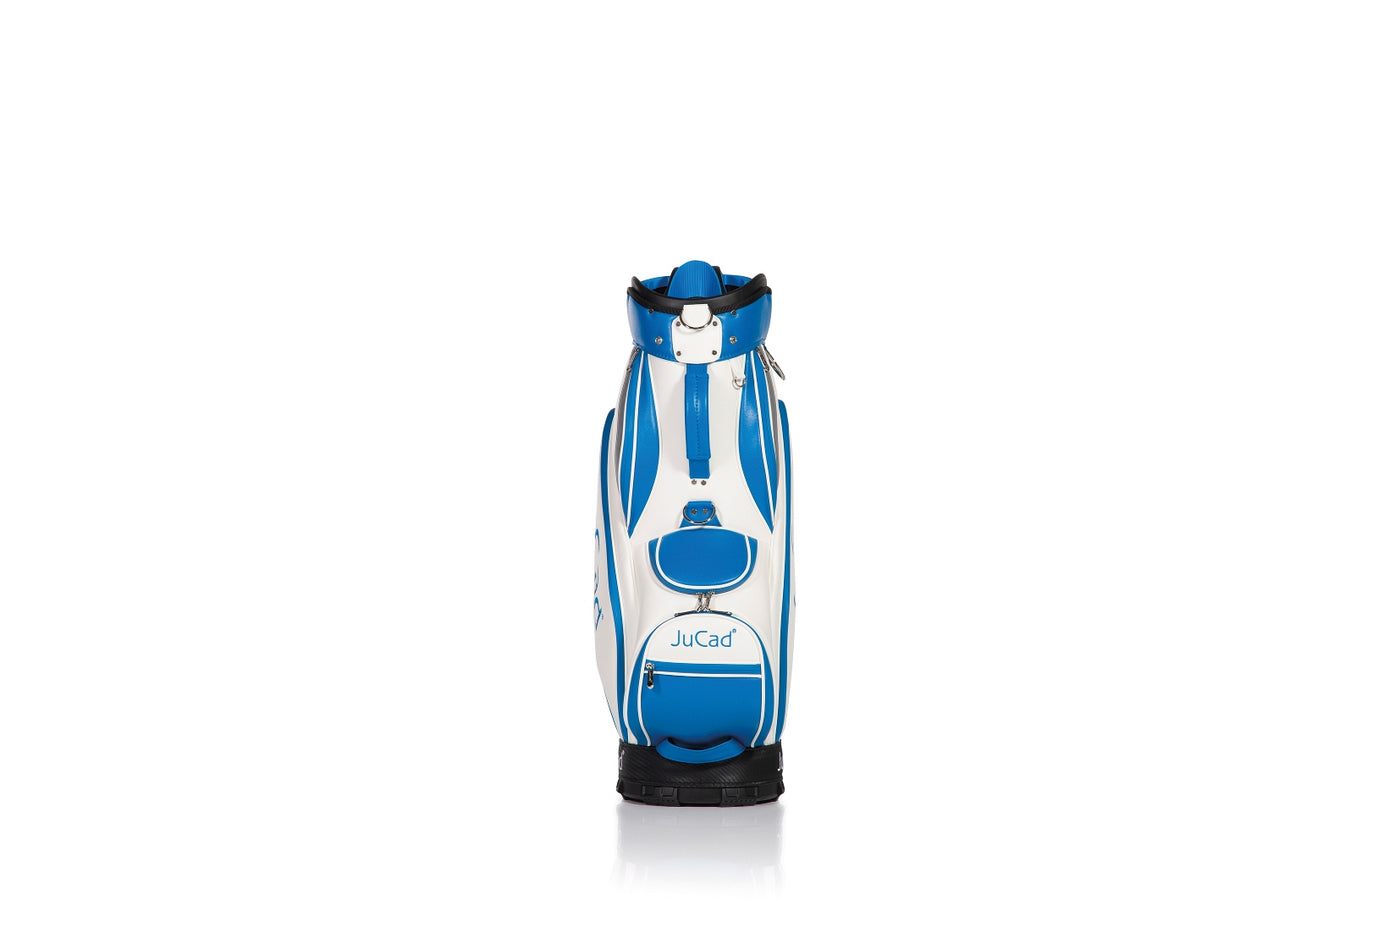 JuCad Golfbag Pro - the classic tour bag